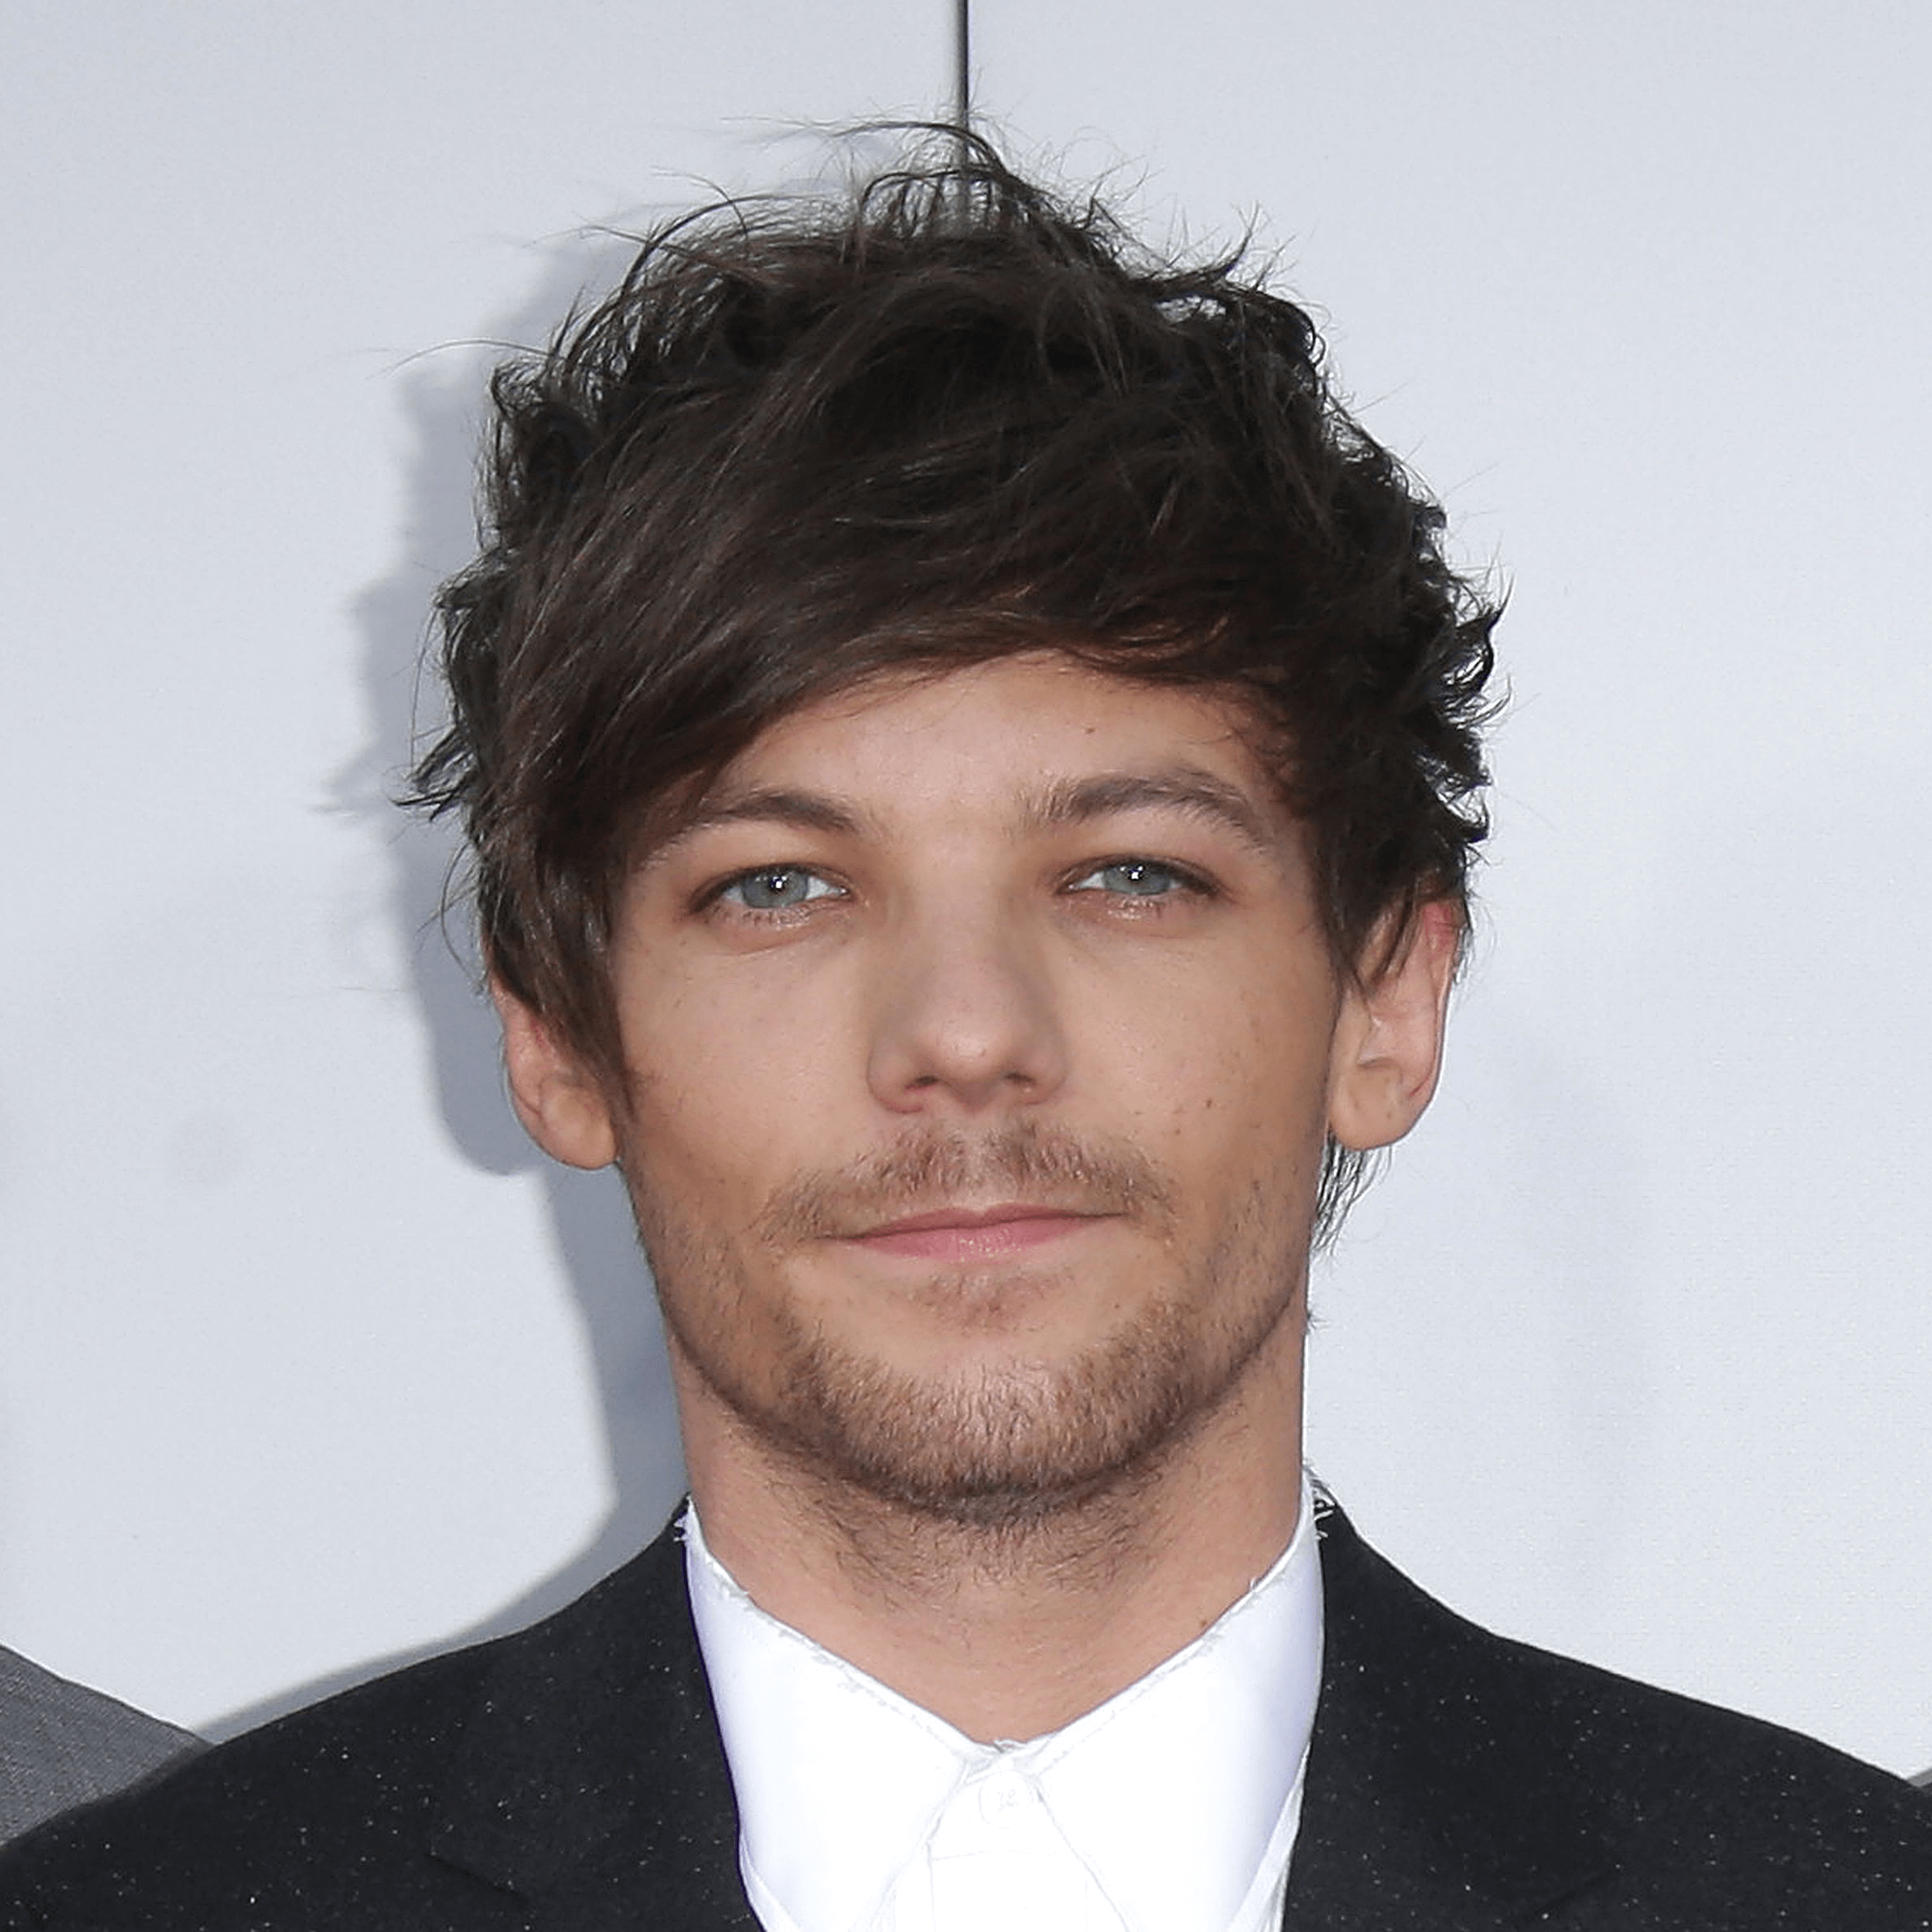 Louis Tomlinson joins Soccer Aid England line-up